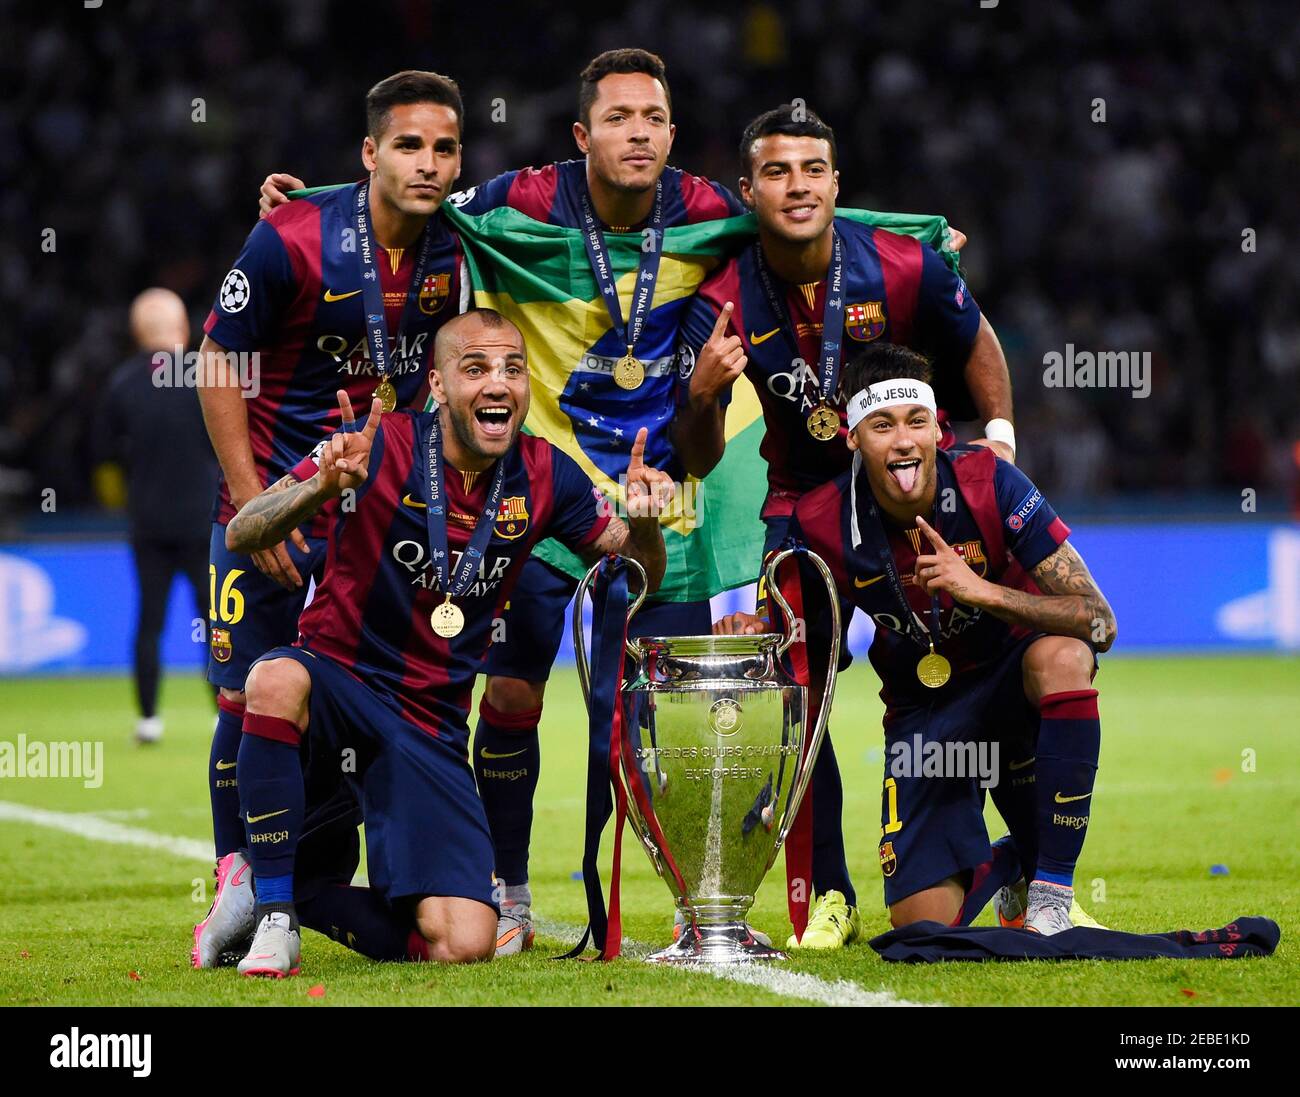 Football Fc Barcelona V Juventus Uefa Champions League Final Olympiastadion Berlin Germany 6 6 15 From L R Barcelona S Douglas Dani Alves Adriano Rafinha And Neymar With The Trophy After Winning